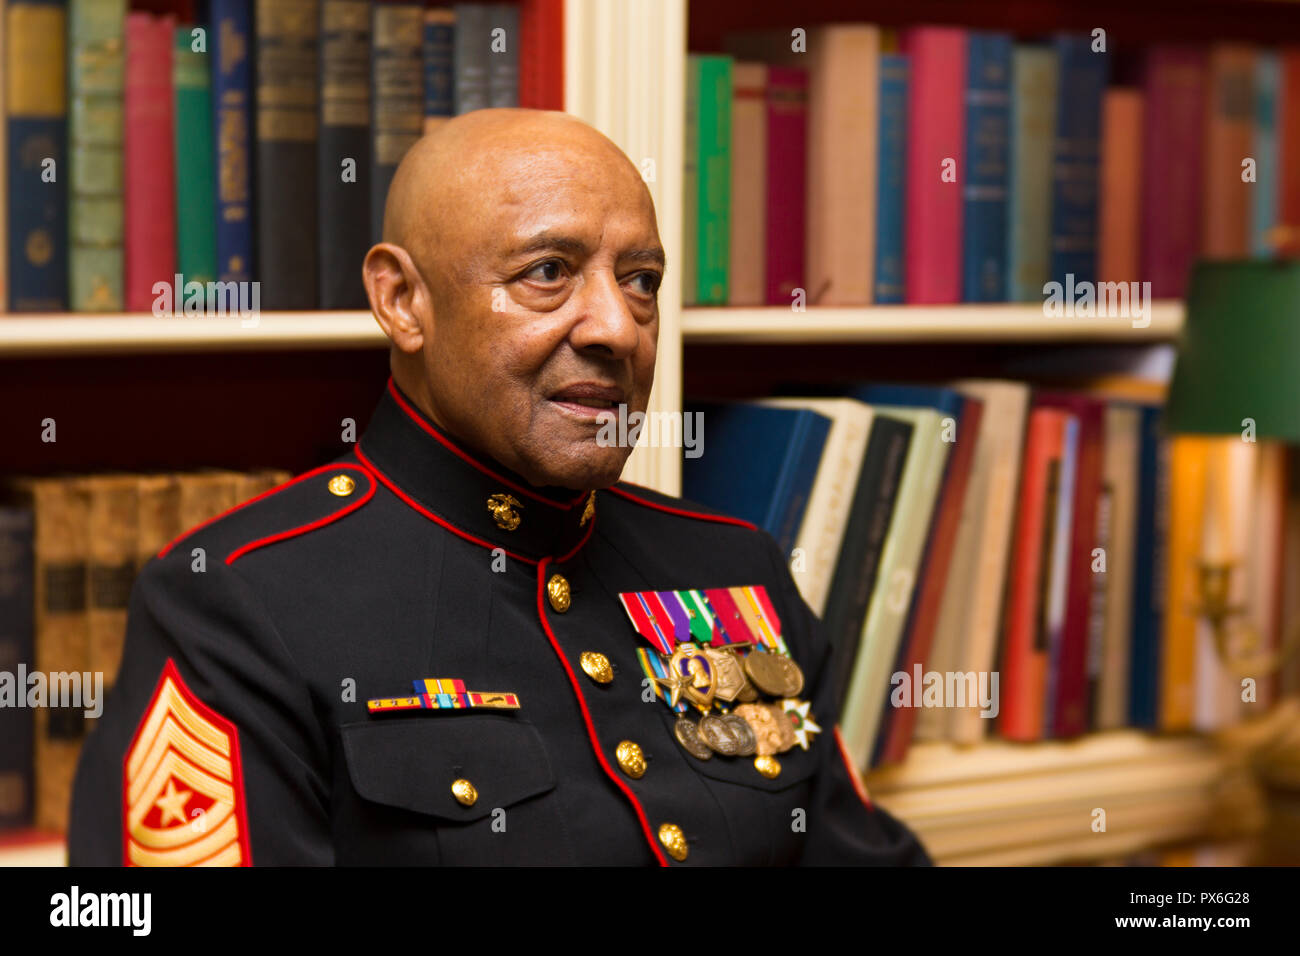 Medal of Honor recipient retired U.S. Marine Sgt. Maj. John Canley during a tour of the White House prior to the presentation ceremony in the East Room of the White House October 17, 2018 in Washington, DC. Canley received the nations highest honor for actions during the Battle of Hue in the Vietnam War. Stock Photo